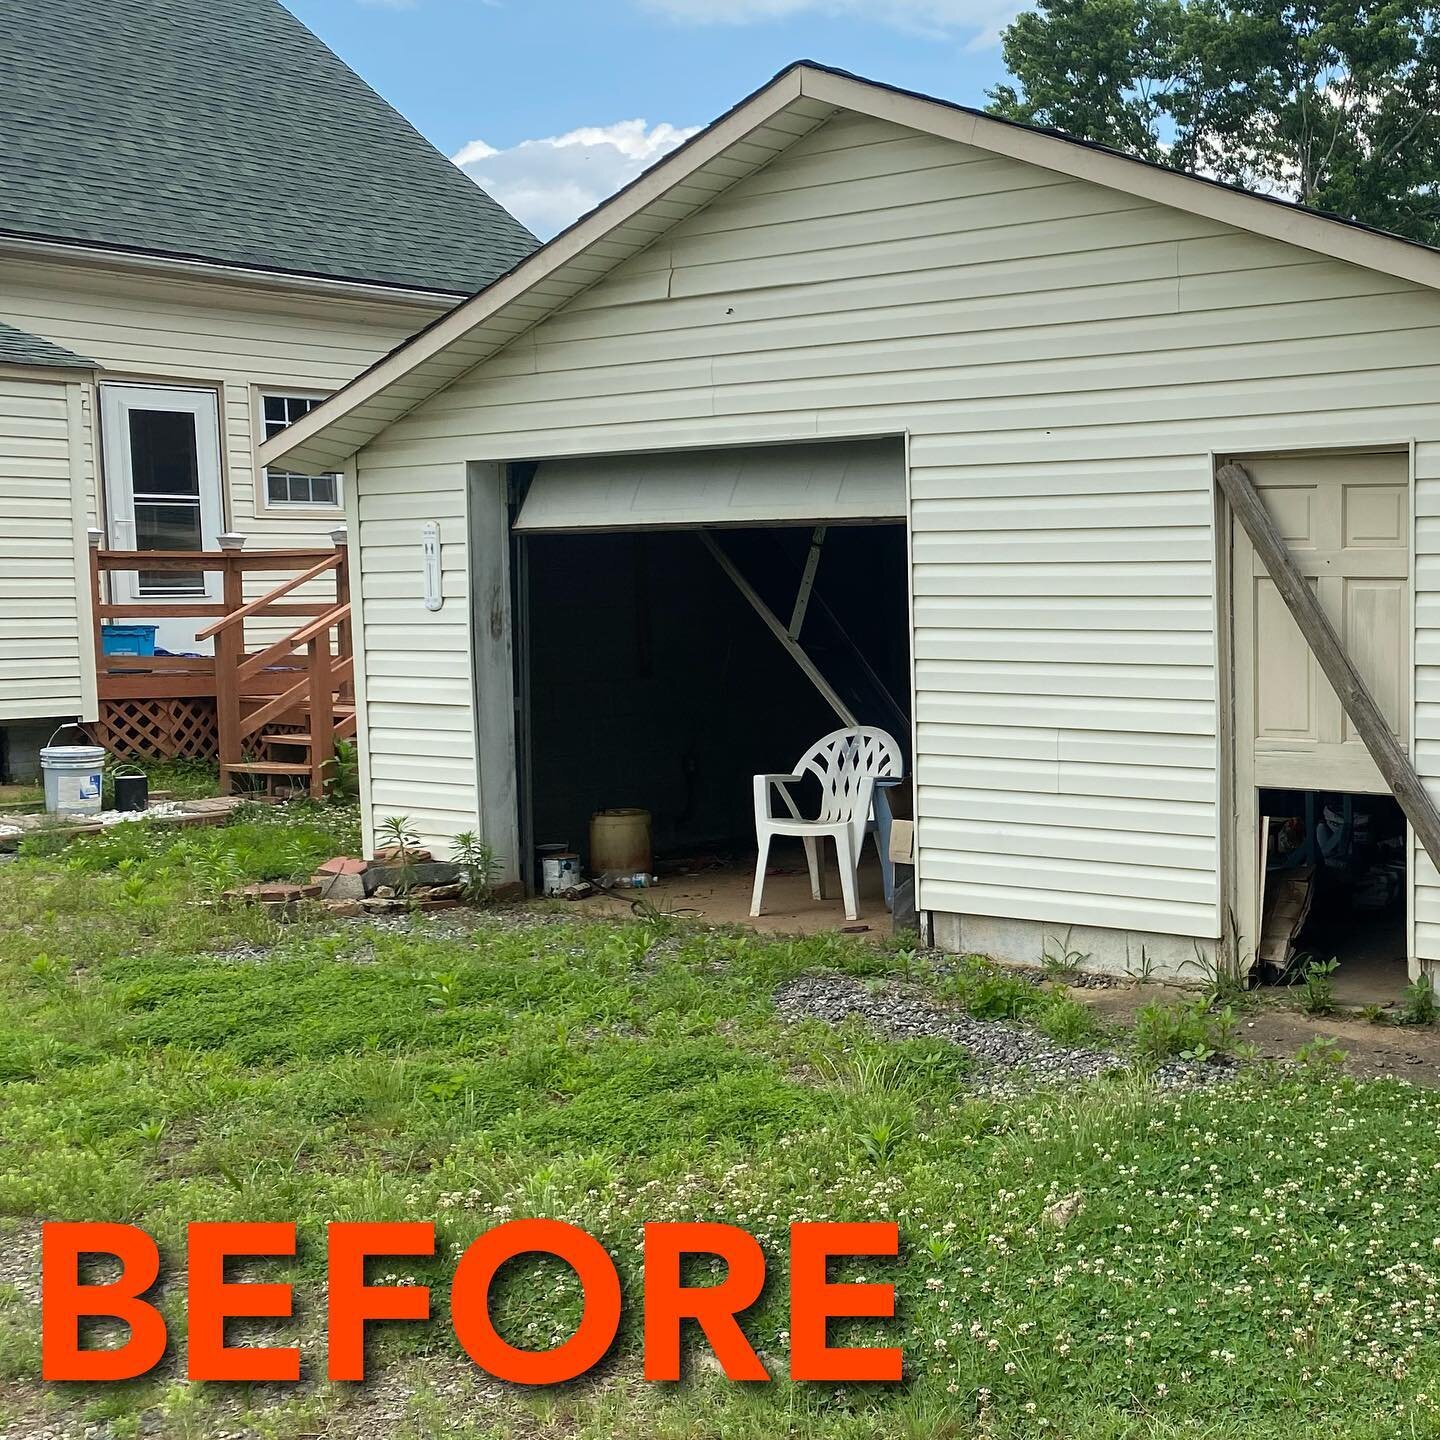 We make things disappear 🪄

Swipe ➡️

Check out this transformation! Need a demo, DM us today!

#beforeandafter #demo #outwiththeold #renovation #transformation #clearview #weloveourjob #friday